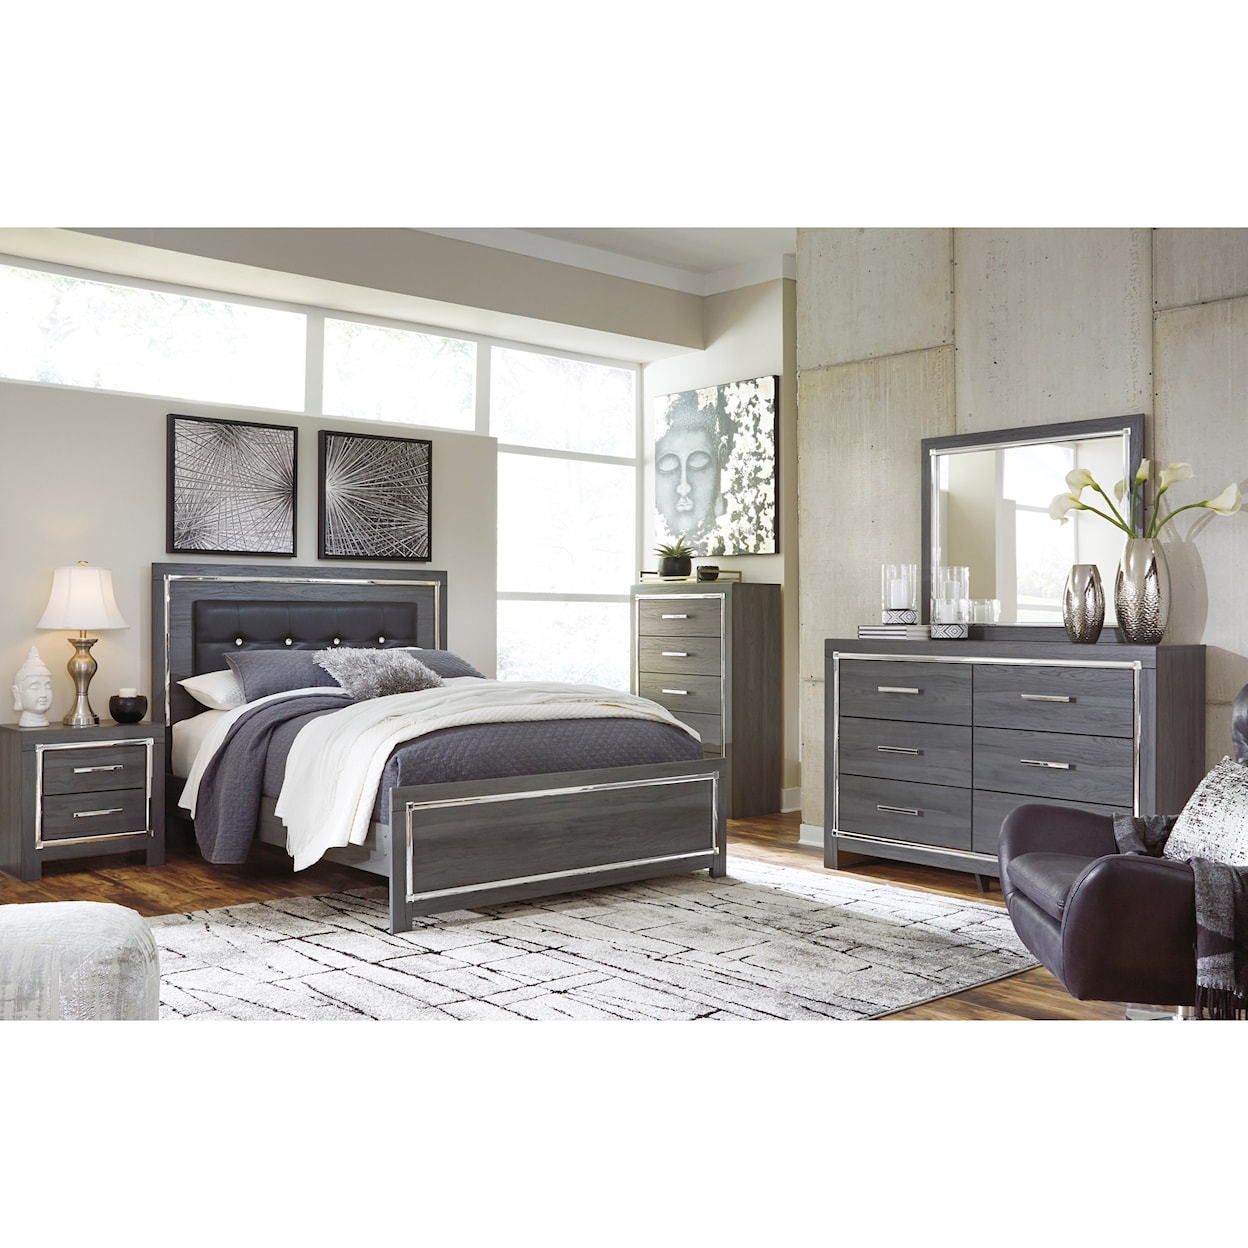 Signature Design by Ashley Lodanna 7PC Queen Bedroom Group